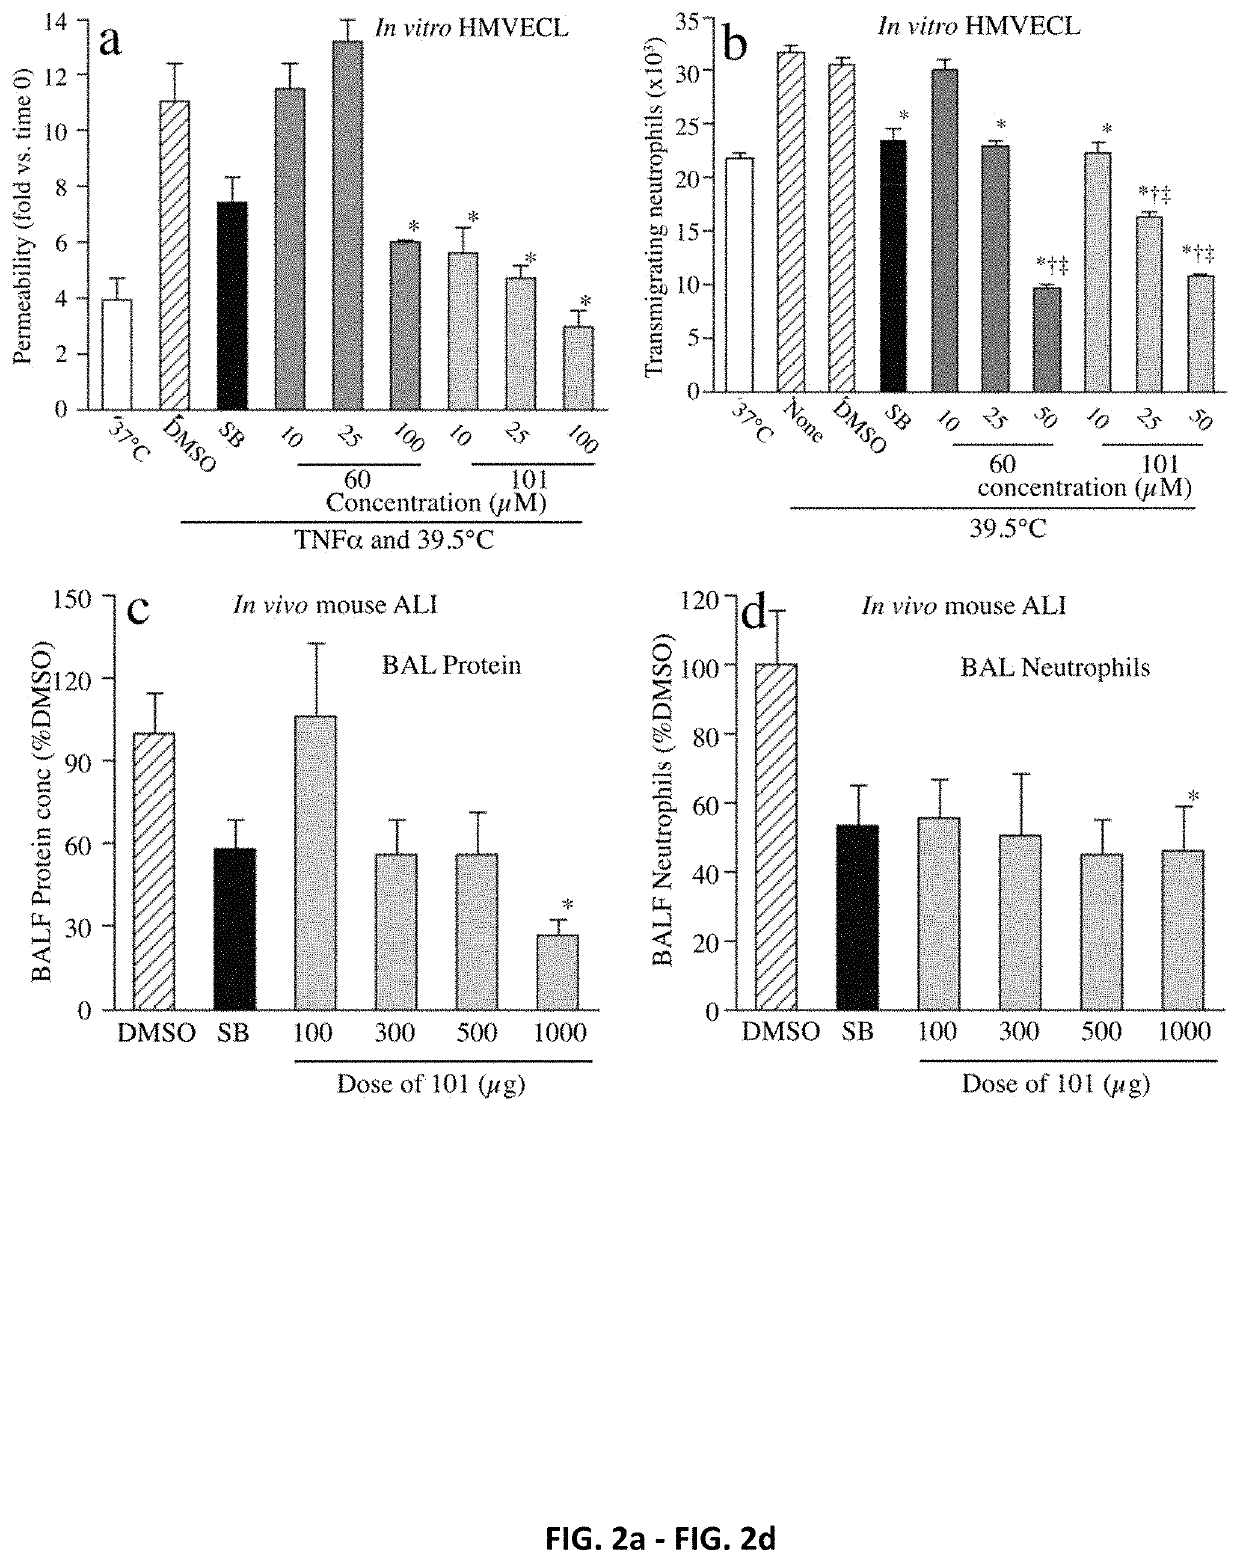 NON-ATP/CATALYTIC SITE p38 MITOGEN ACTIVATED PROTEIN KINASE INHIBITORS